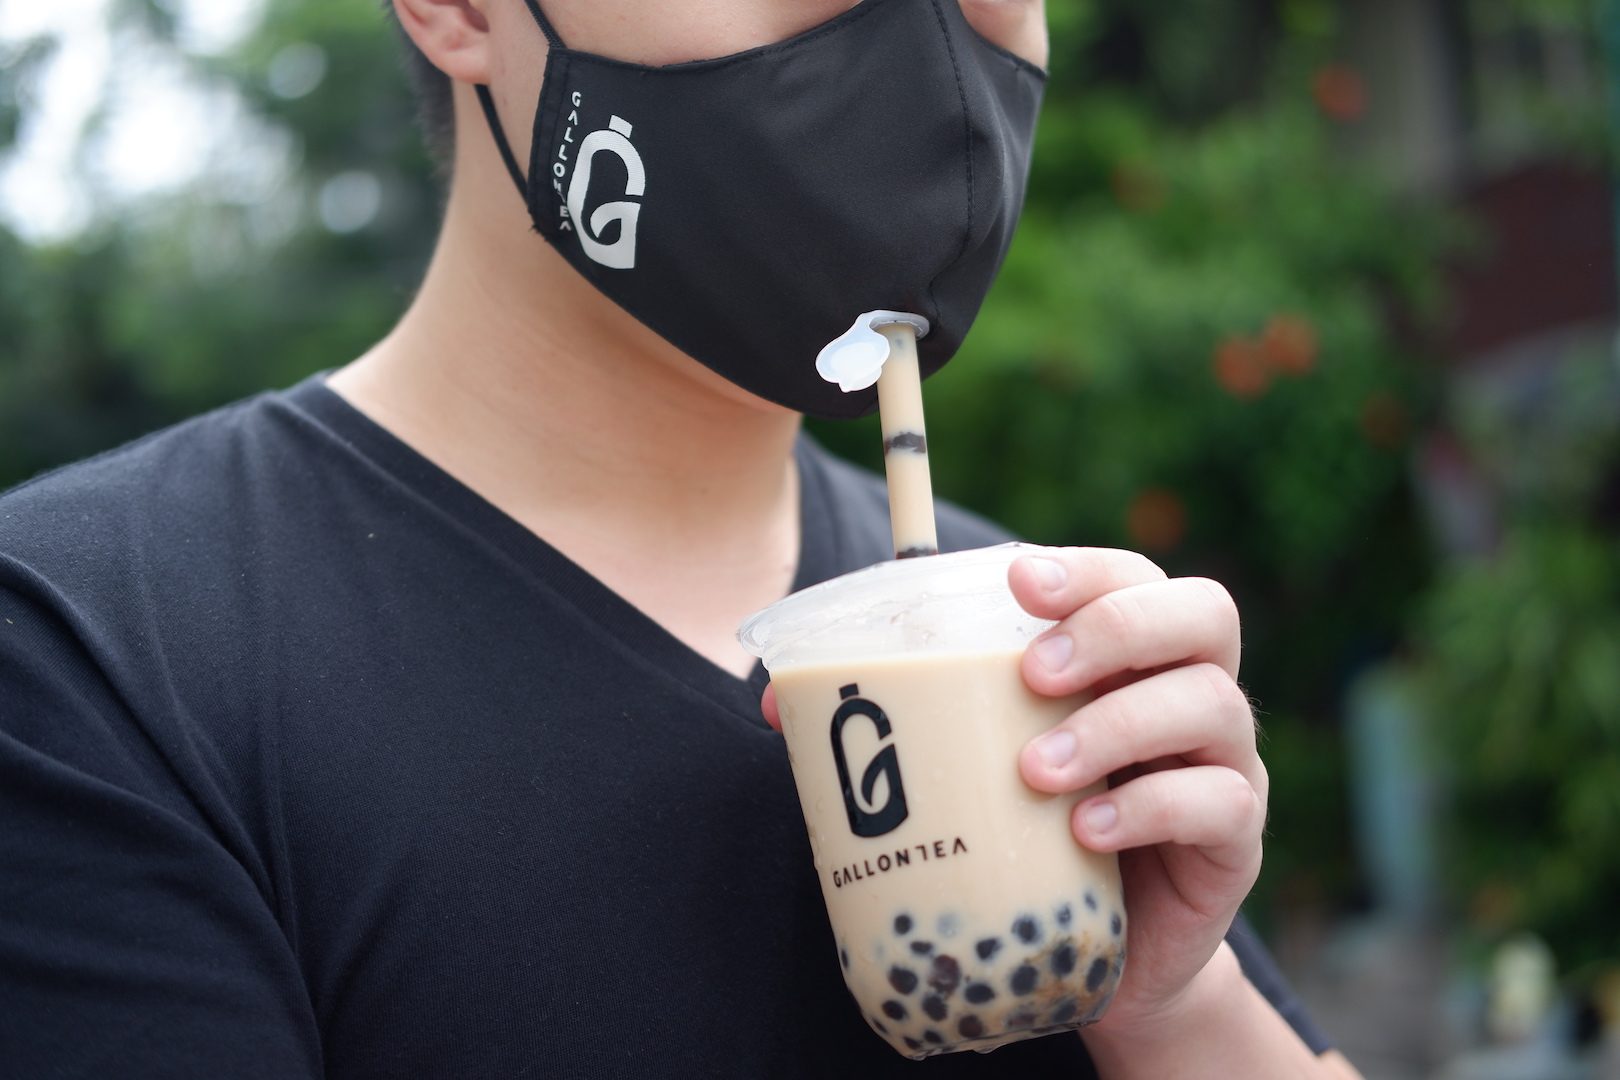 LOOK: This ‘sippy face mask’ lets you drink while on-the-go